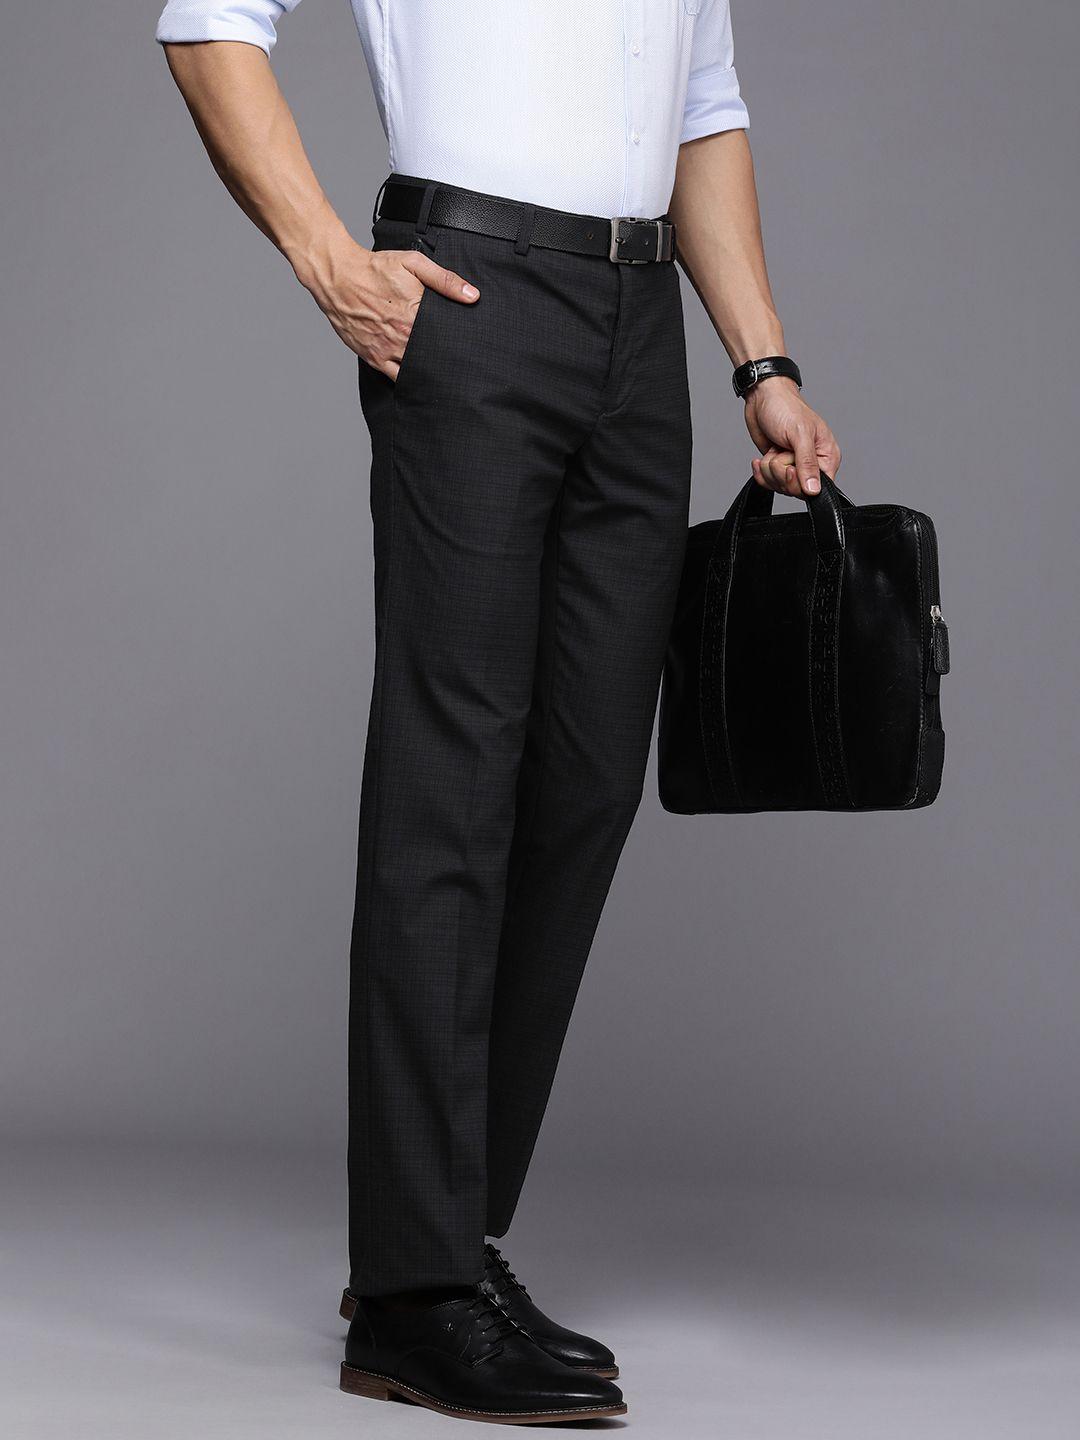 raymond men checked slim fit formal trousers